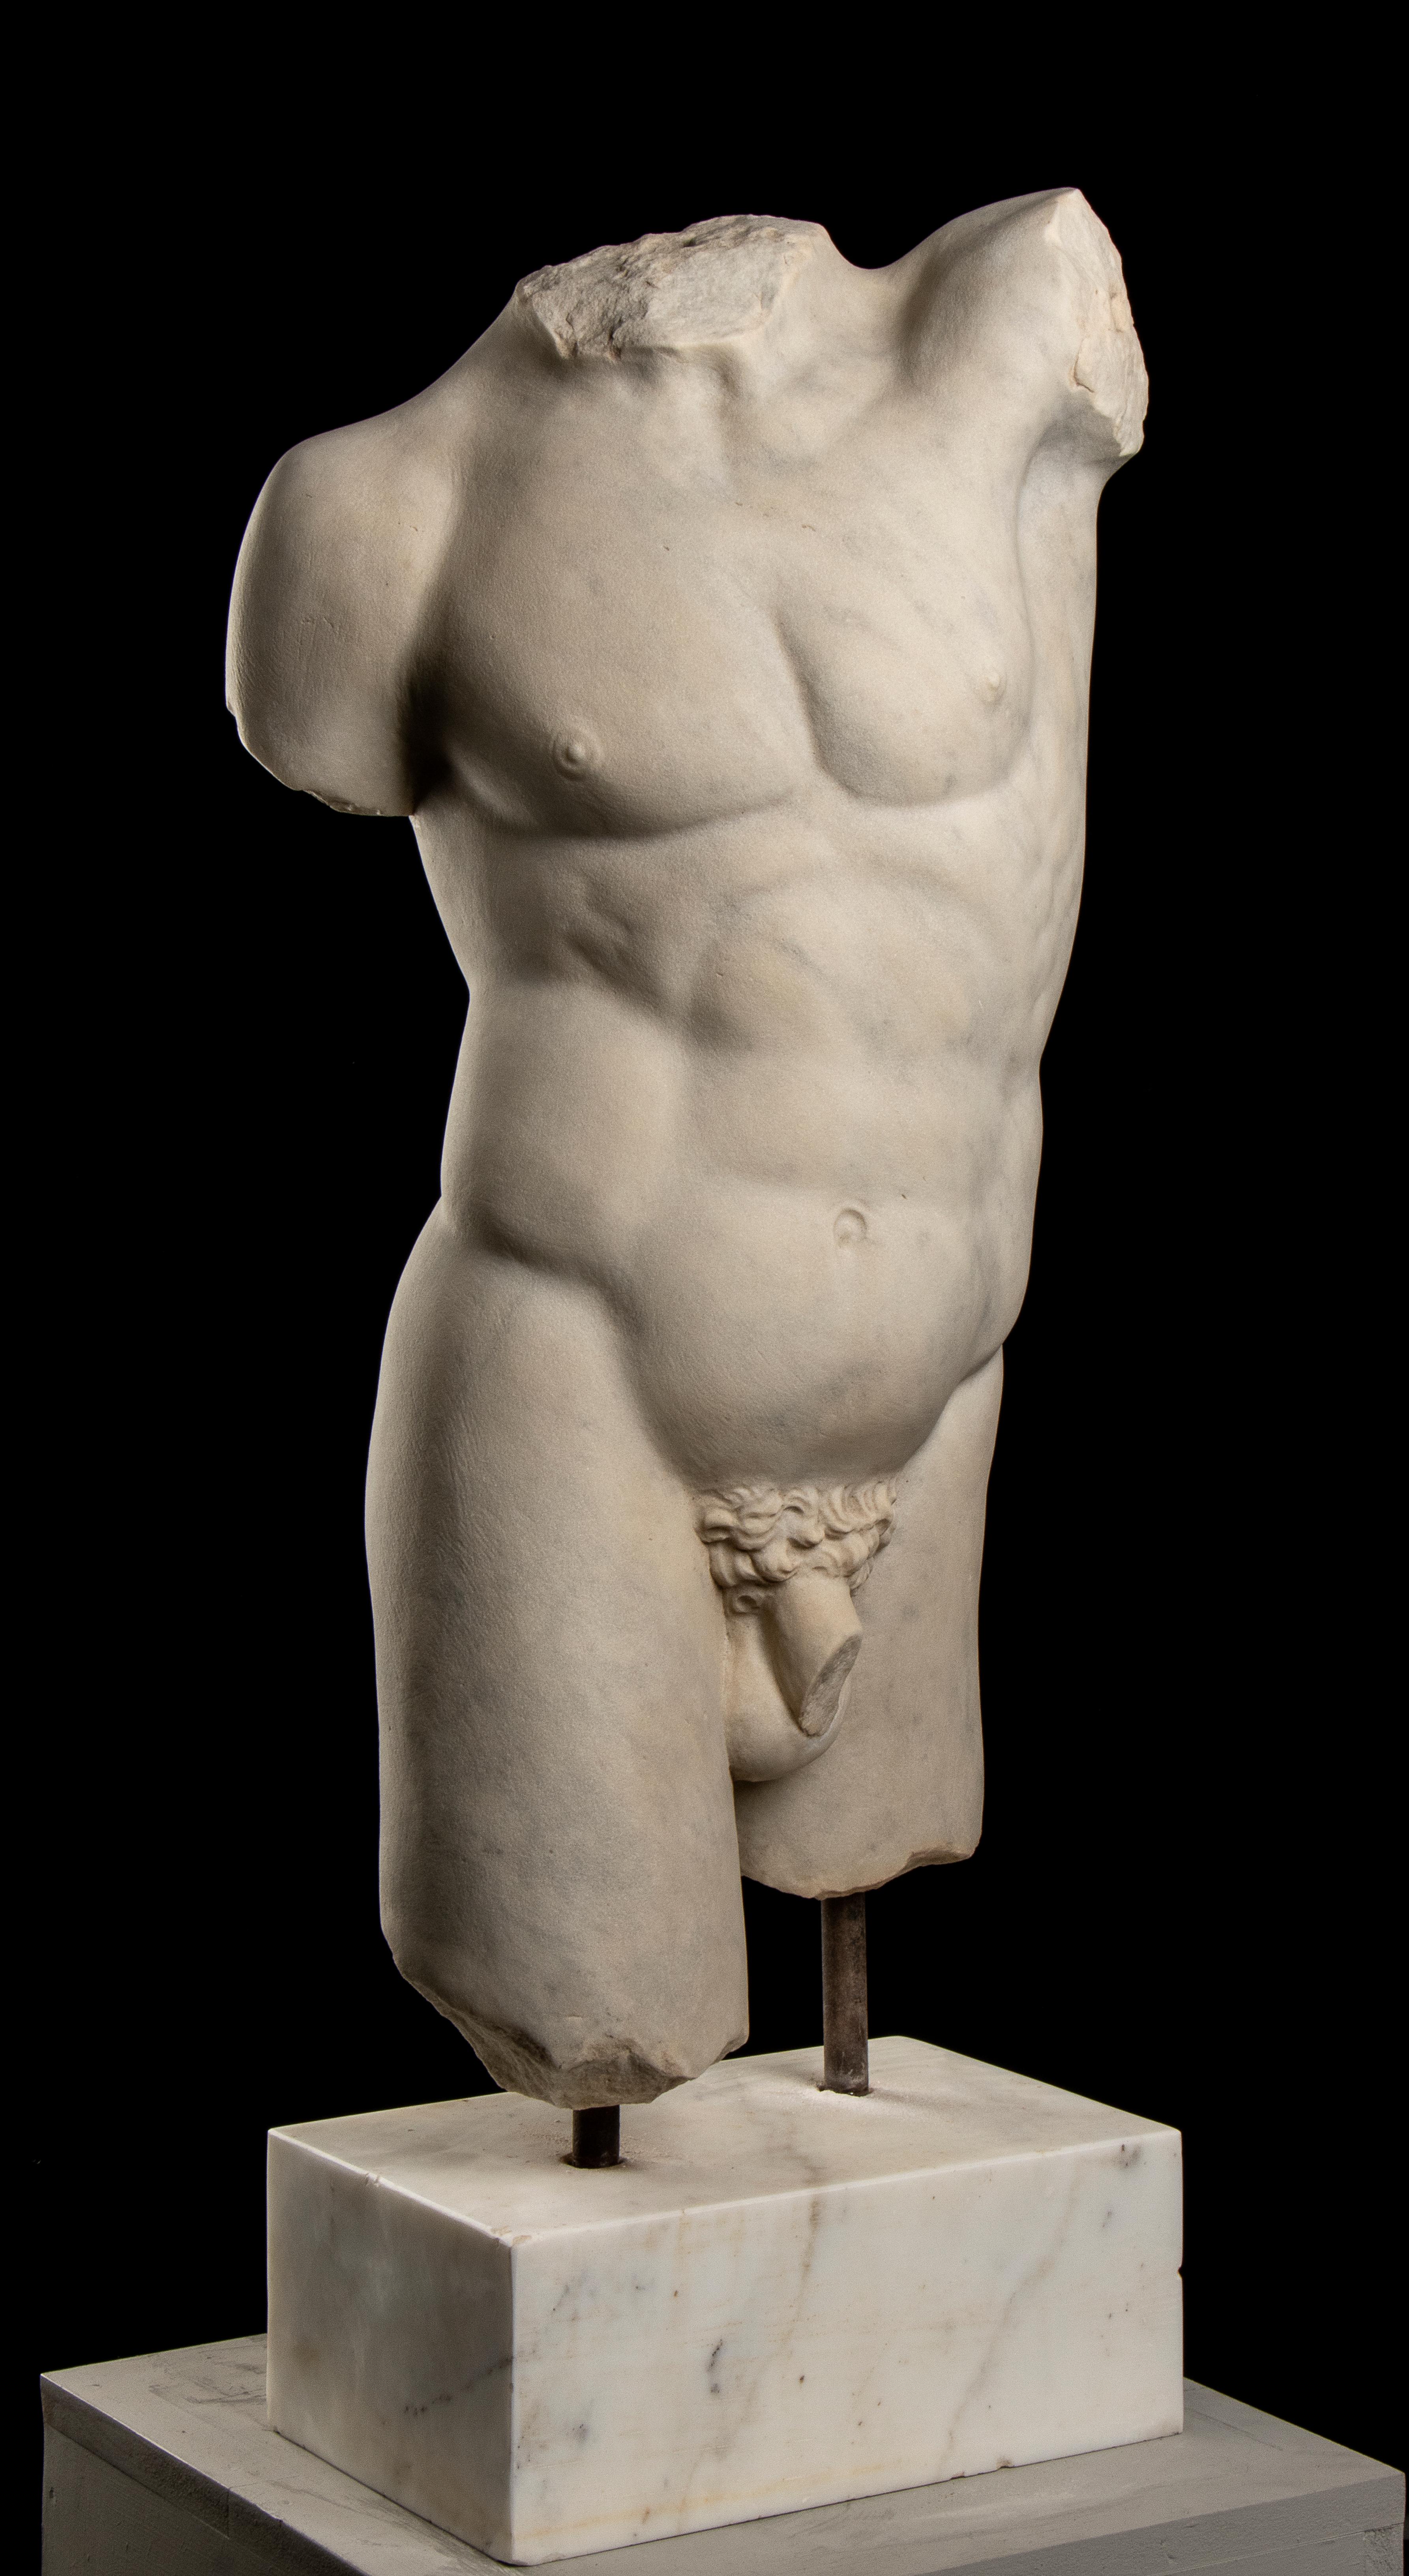 Italian 20th century white statuary marble torso sculpture of an athlete, with the left shoulder facing upwards and the right leg slightly moved forward in the Contrapposto pose.
The ancient Greeks invented the Contrapposto position in the early 5th